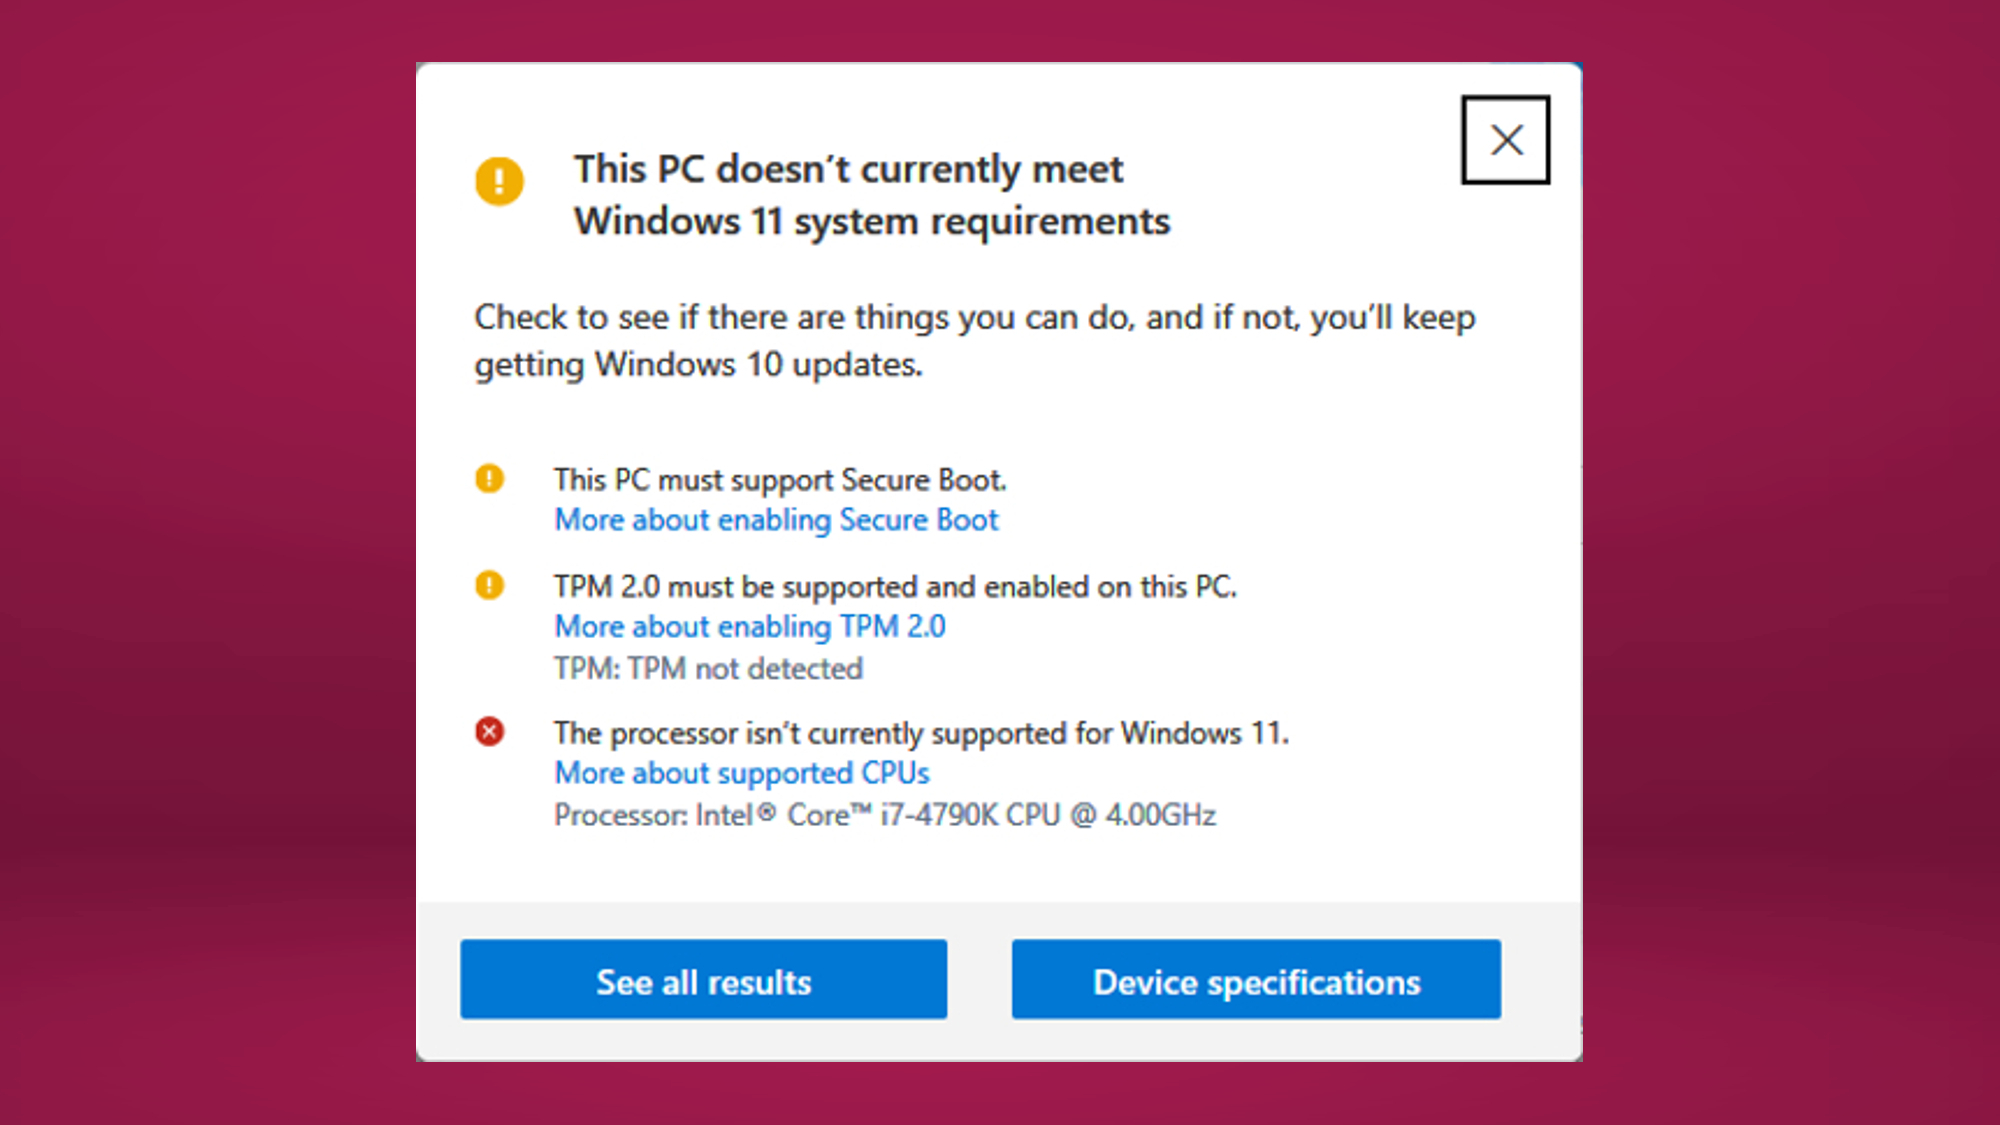 Update to Windows 11 without meeting requirements